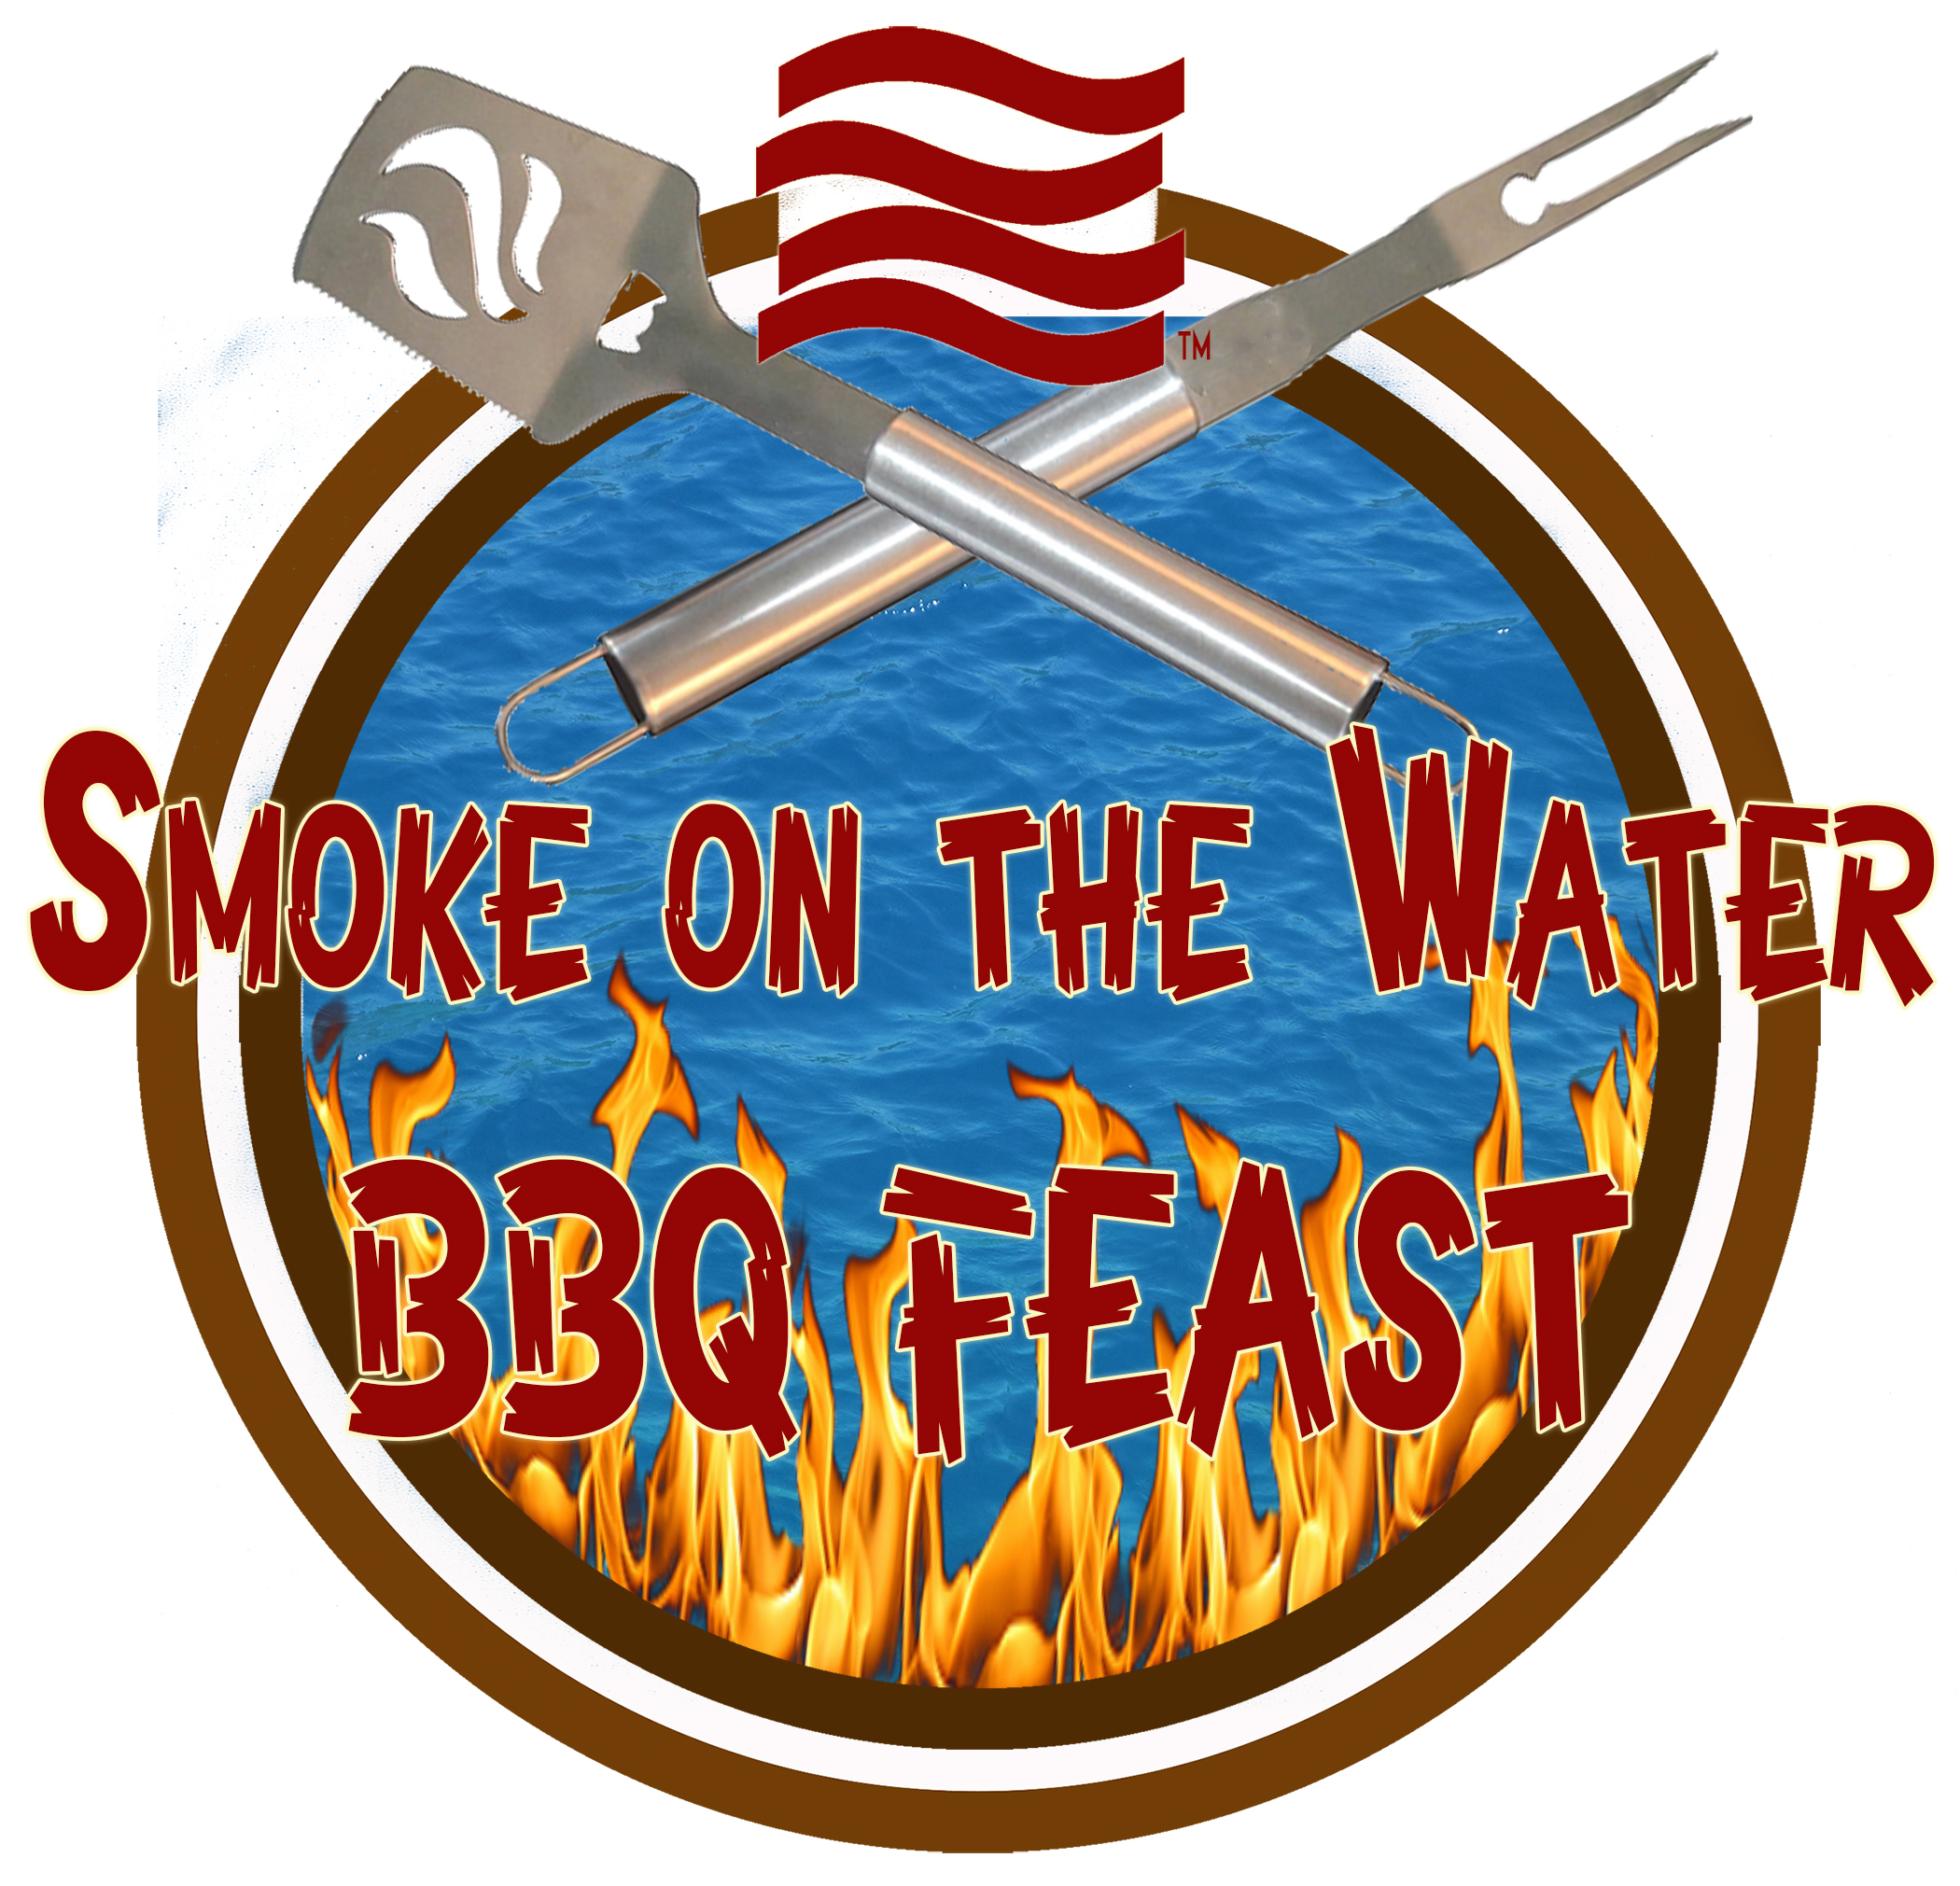 Riverwalk's 4th Annual Smoke on the Water BBQ Feast and COMPETITION!